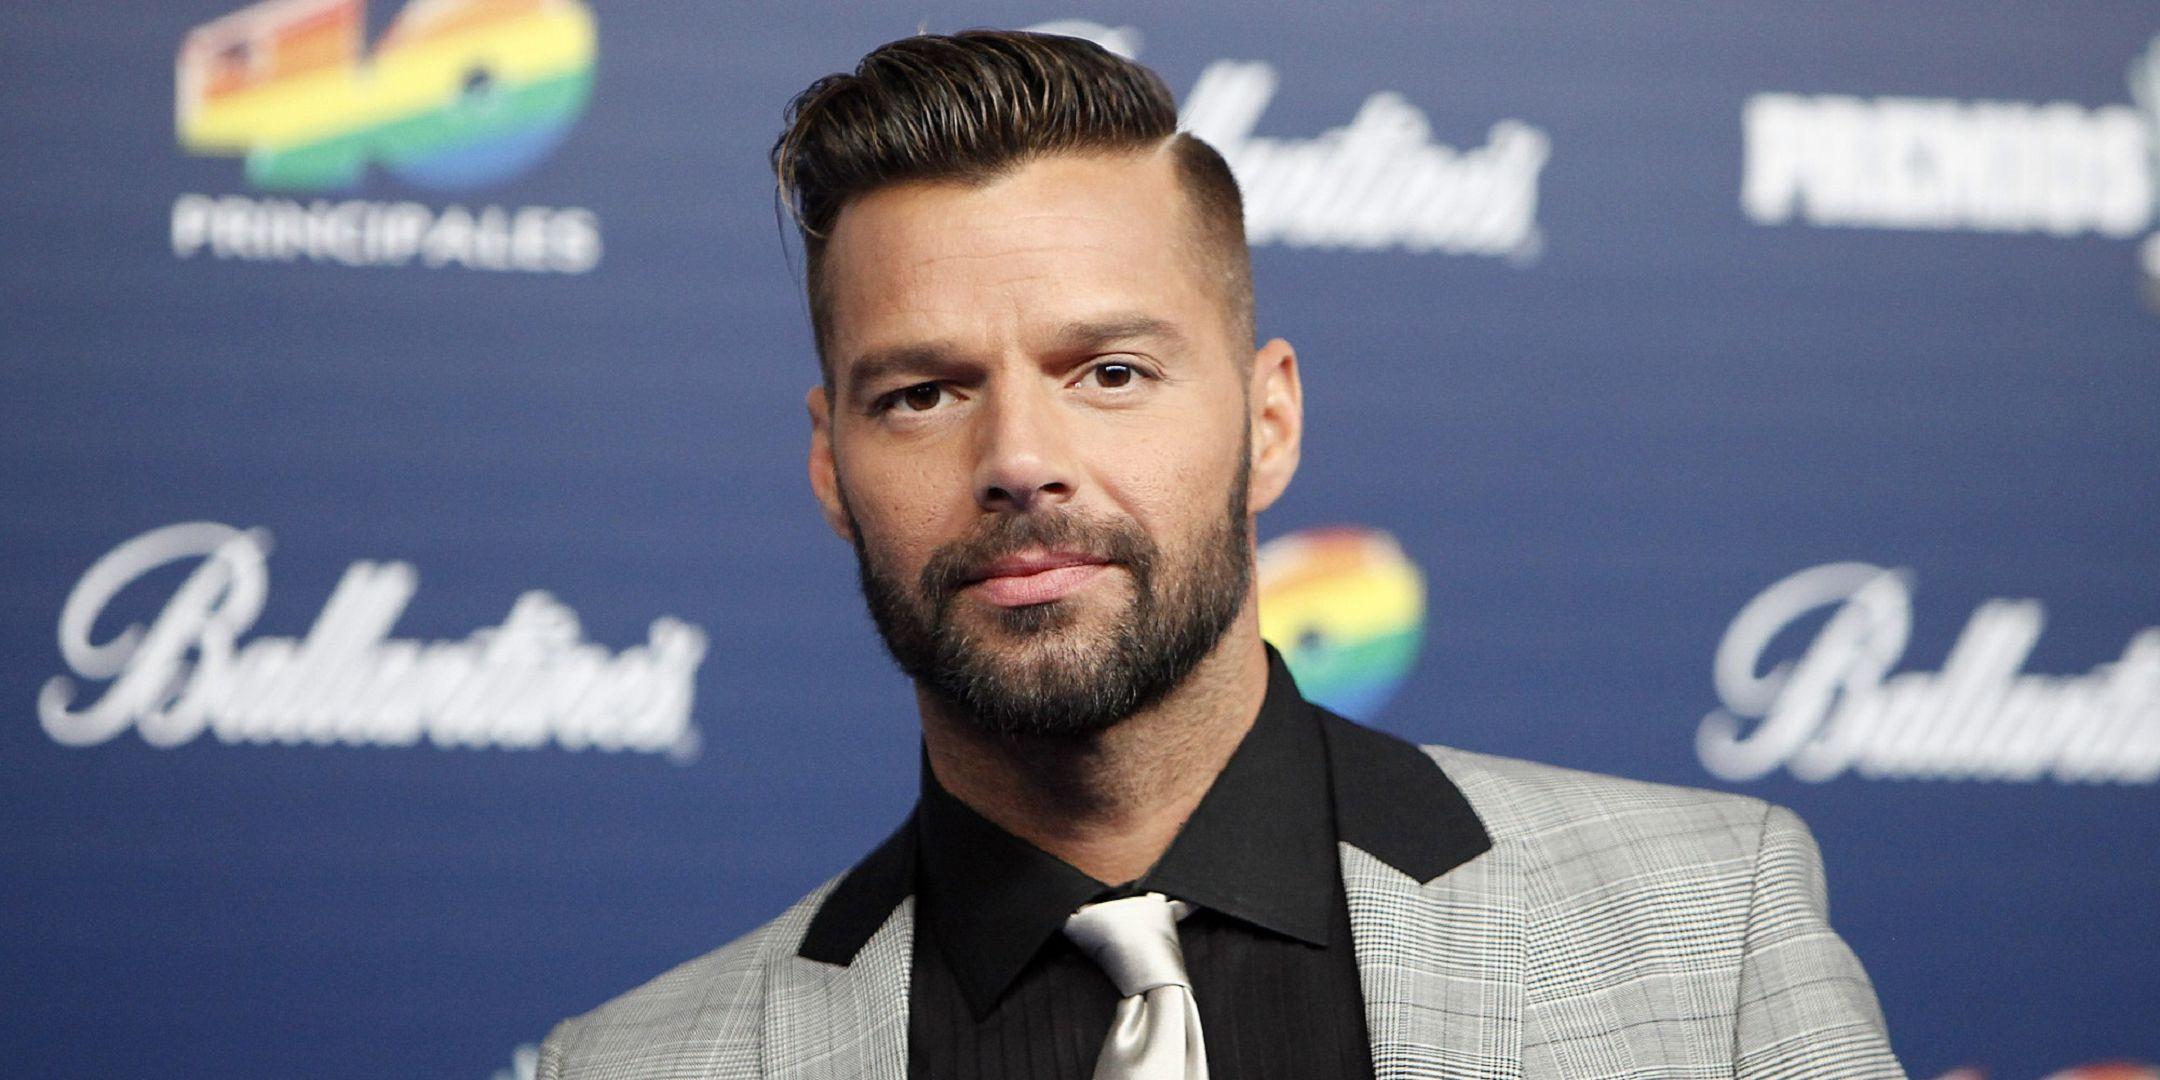 Ricky Martin Wallpaper Image Photo Picture Background